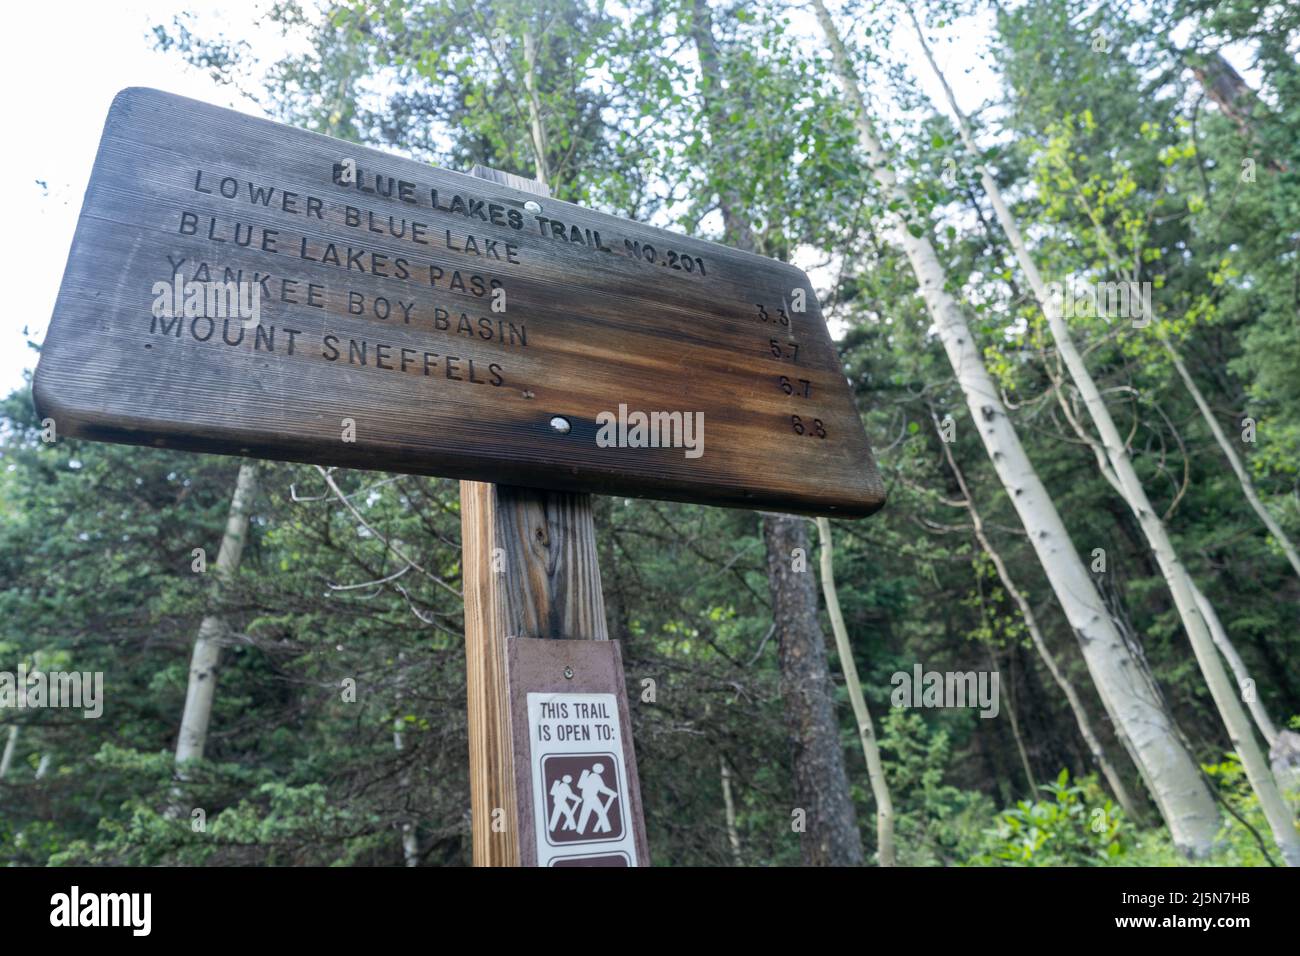 Sign for various trails in the Blue Lakes area, for Mount Sneffels, Yankee Boy Basin and Blue Lakes Pass in Colorado Stock Photo